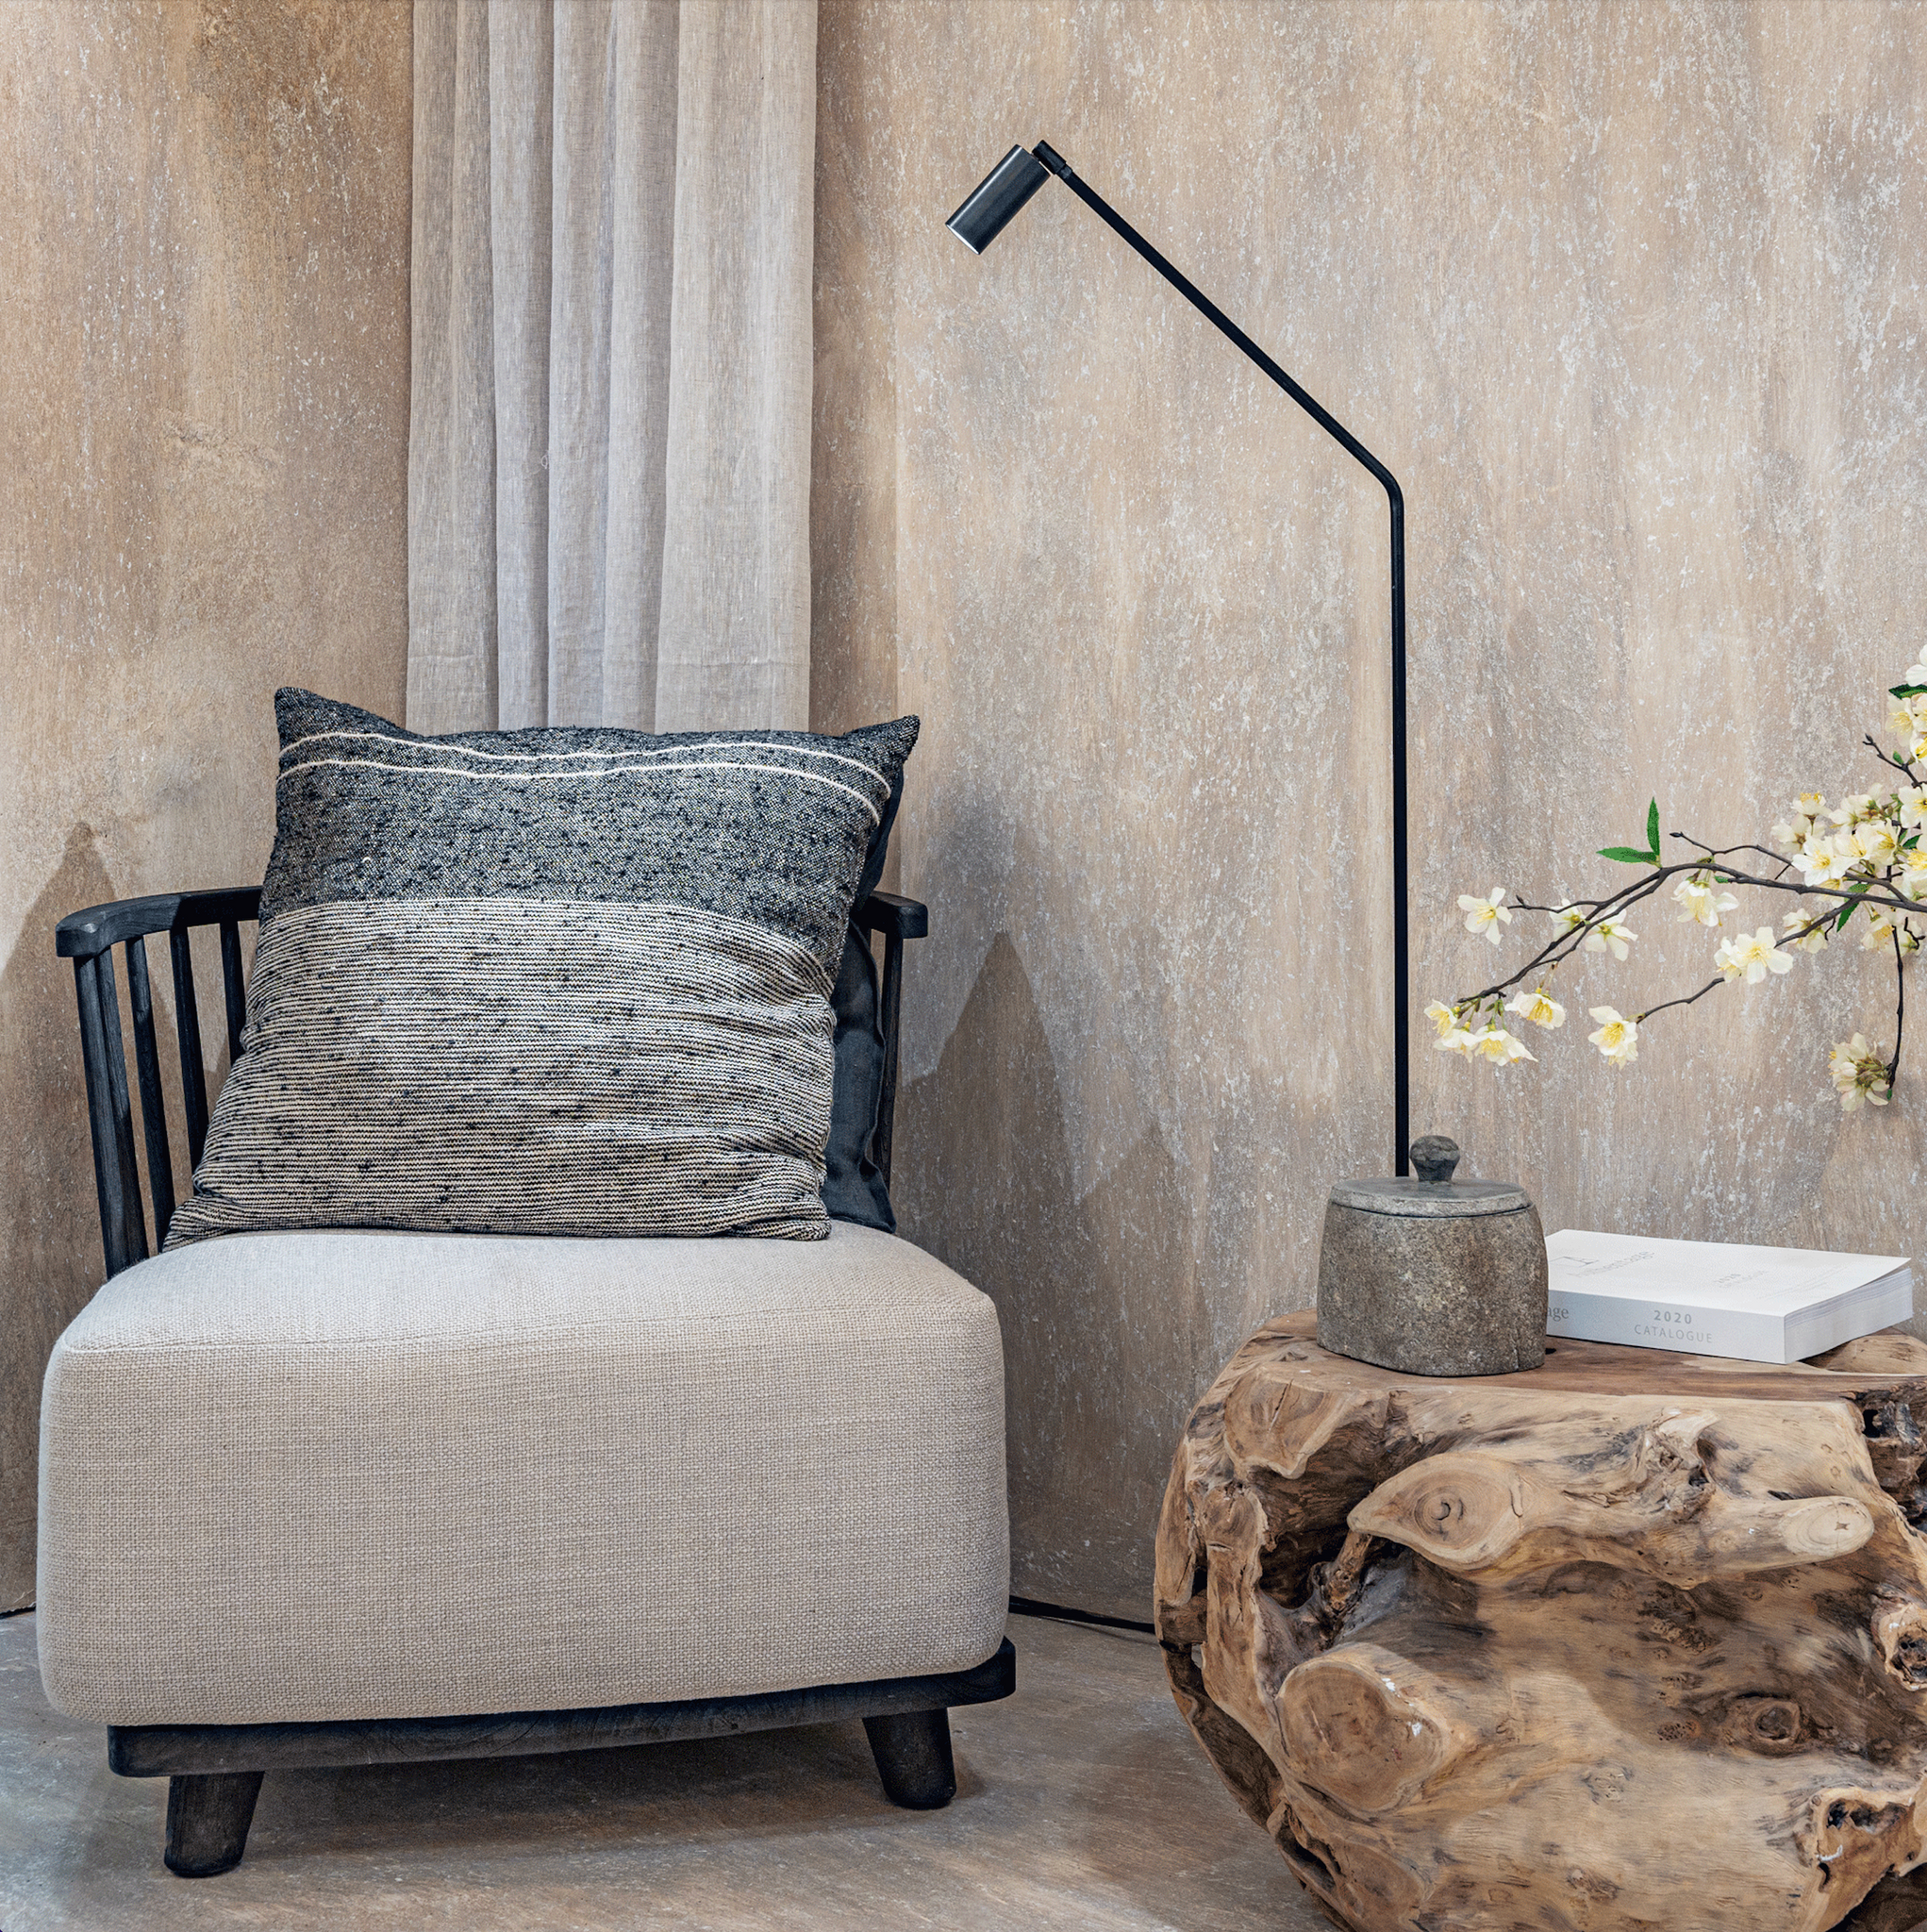 Authentage_reading light_floor lamp_LIT collection